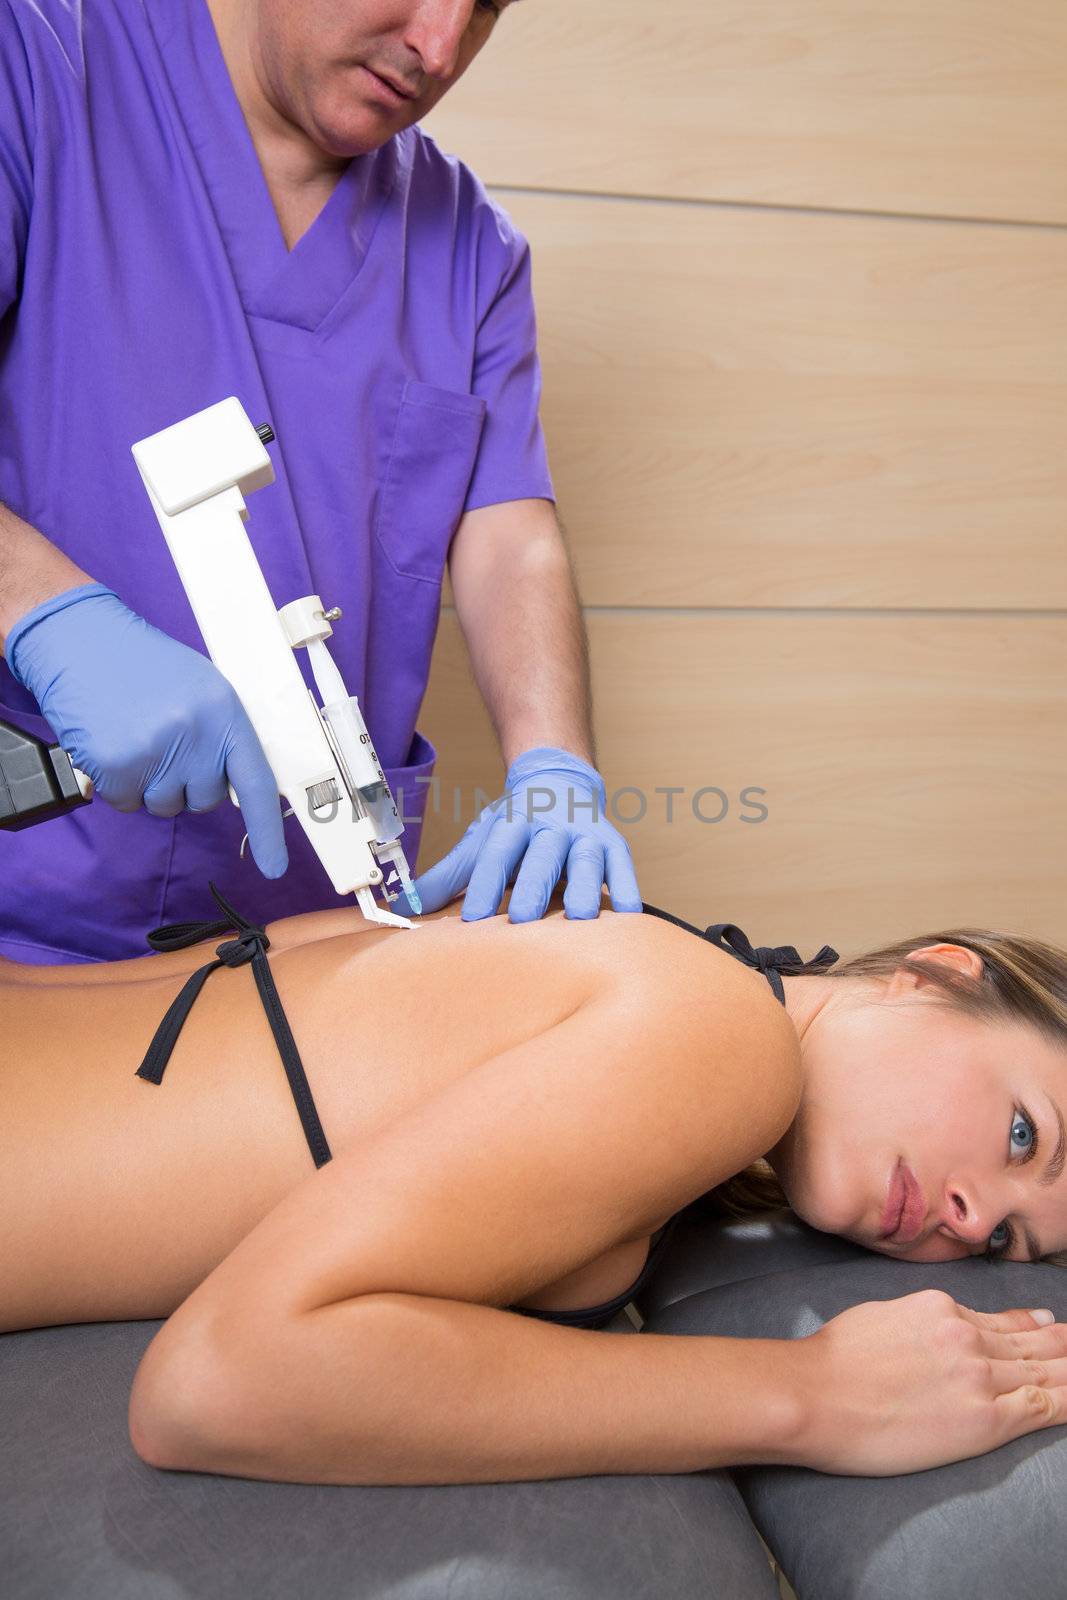 Back lumbar mesotherapy gun doctor with woman patient by lunamarina